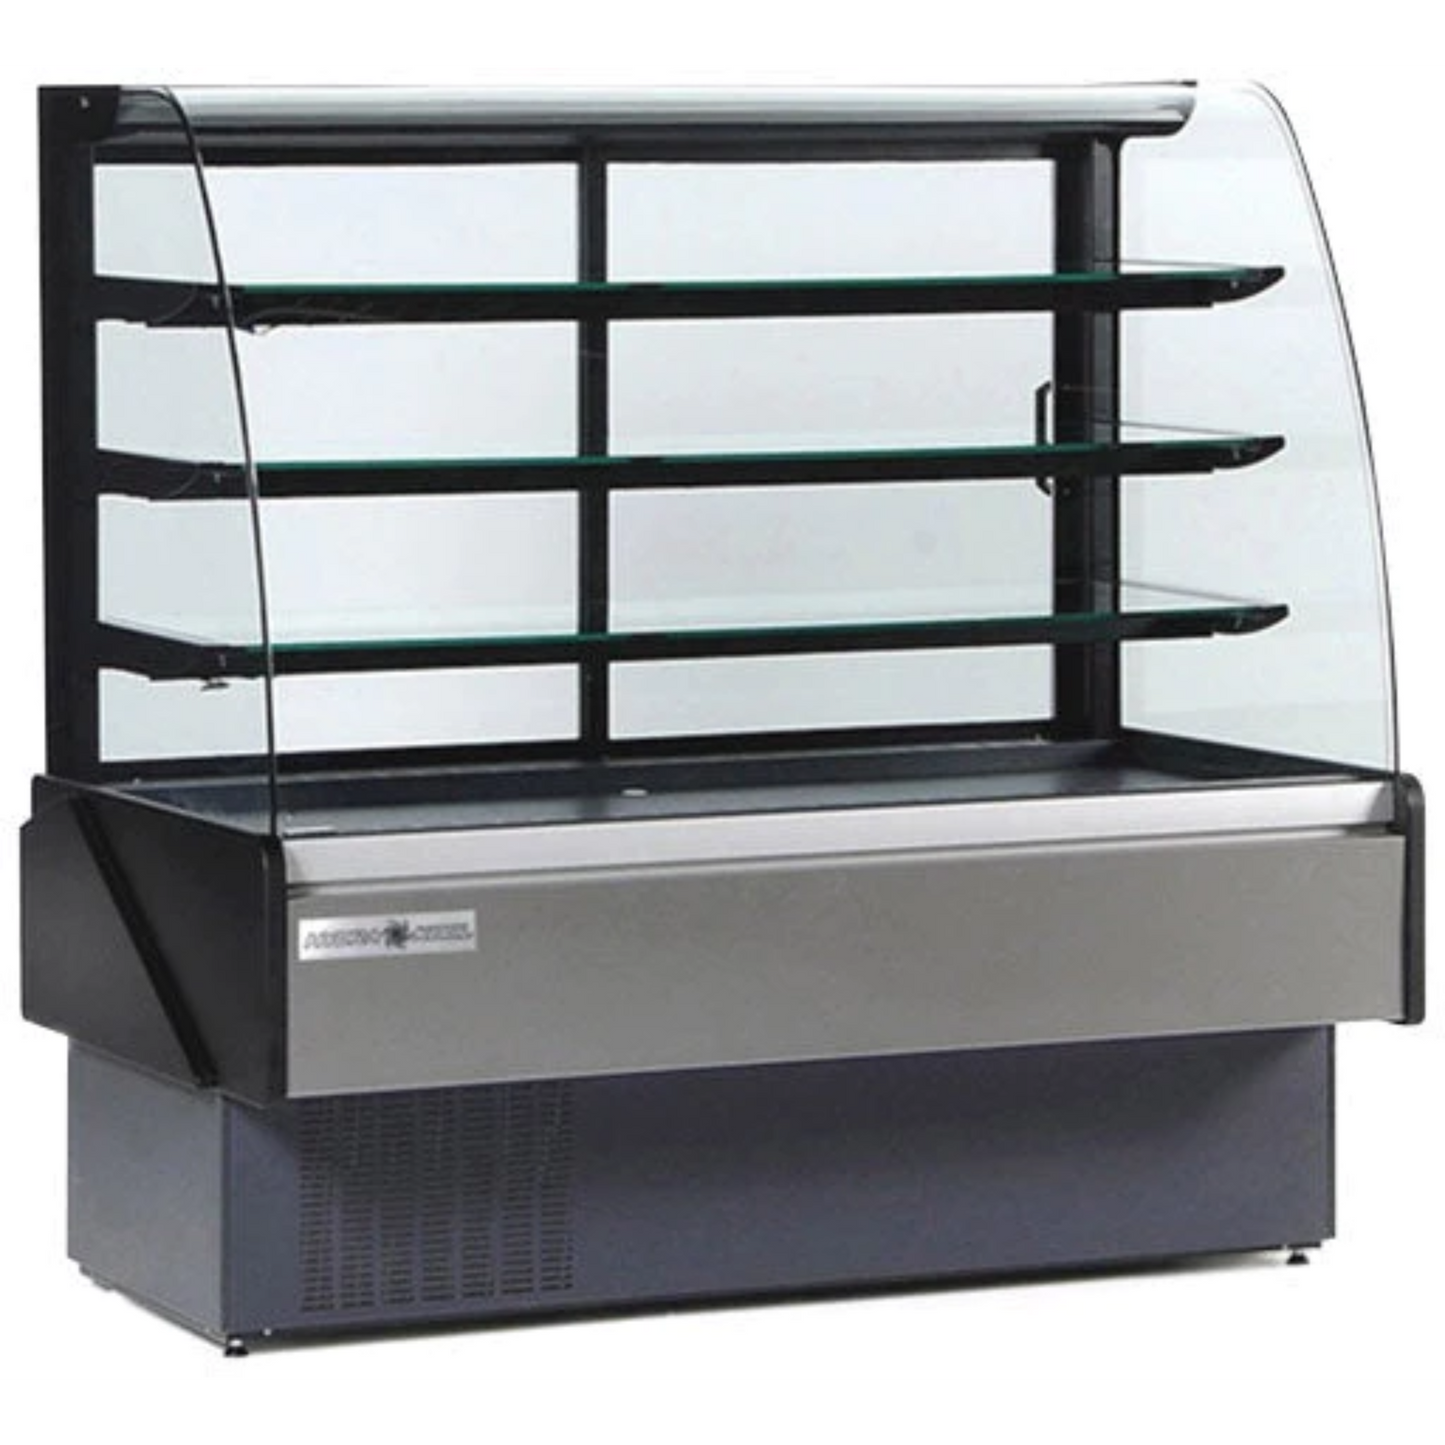 Hydra-Kool KBD-CG-80-D 80" Curved Glass Bakery Deli Case Non-Refrigerated